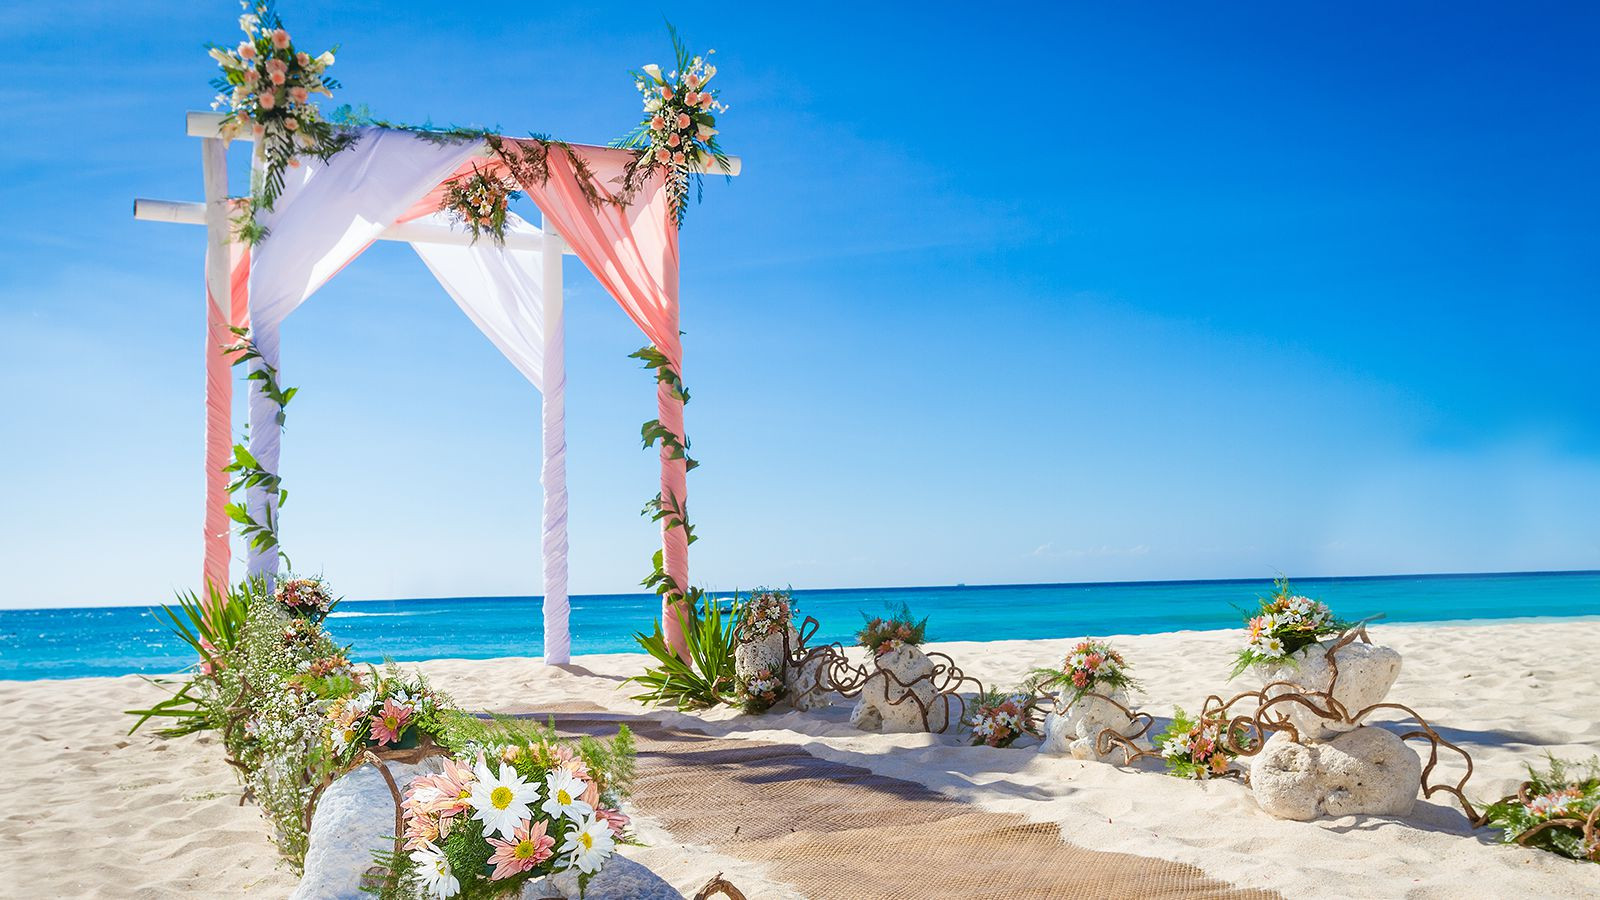 Pictures Of Beach Weddings
 5 Low Cost Ways to Decorate for Your Beach Wedding